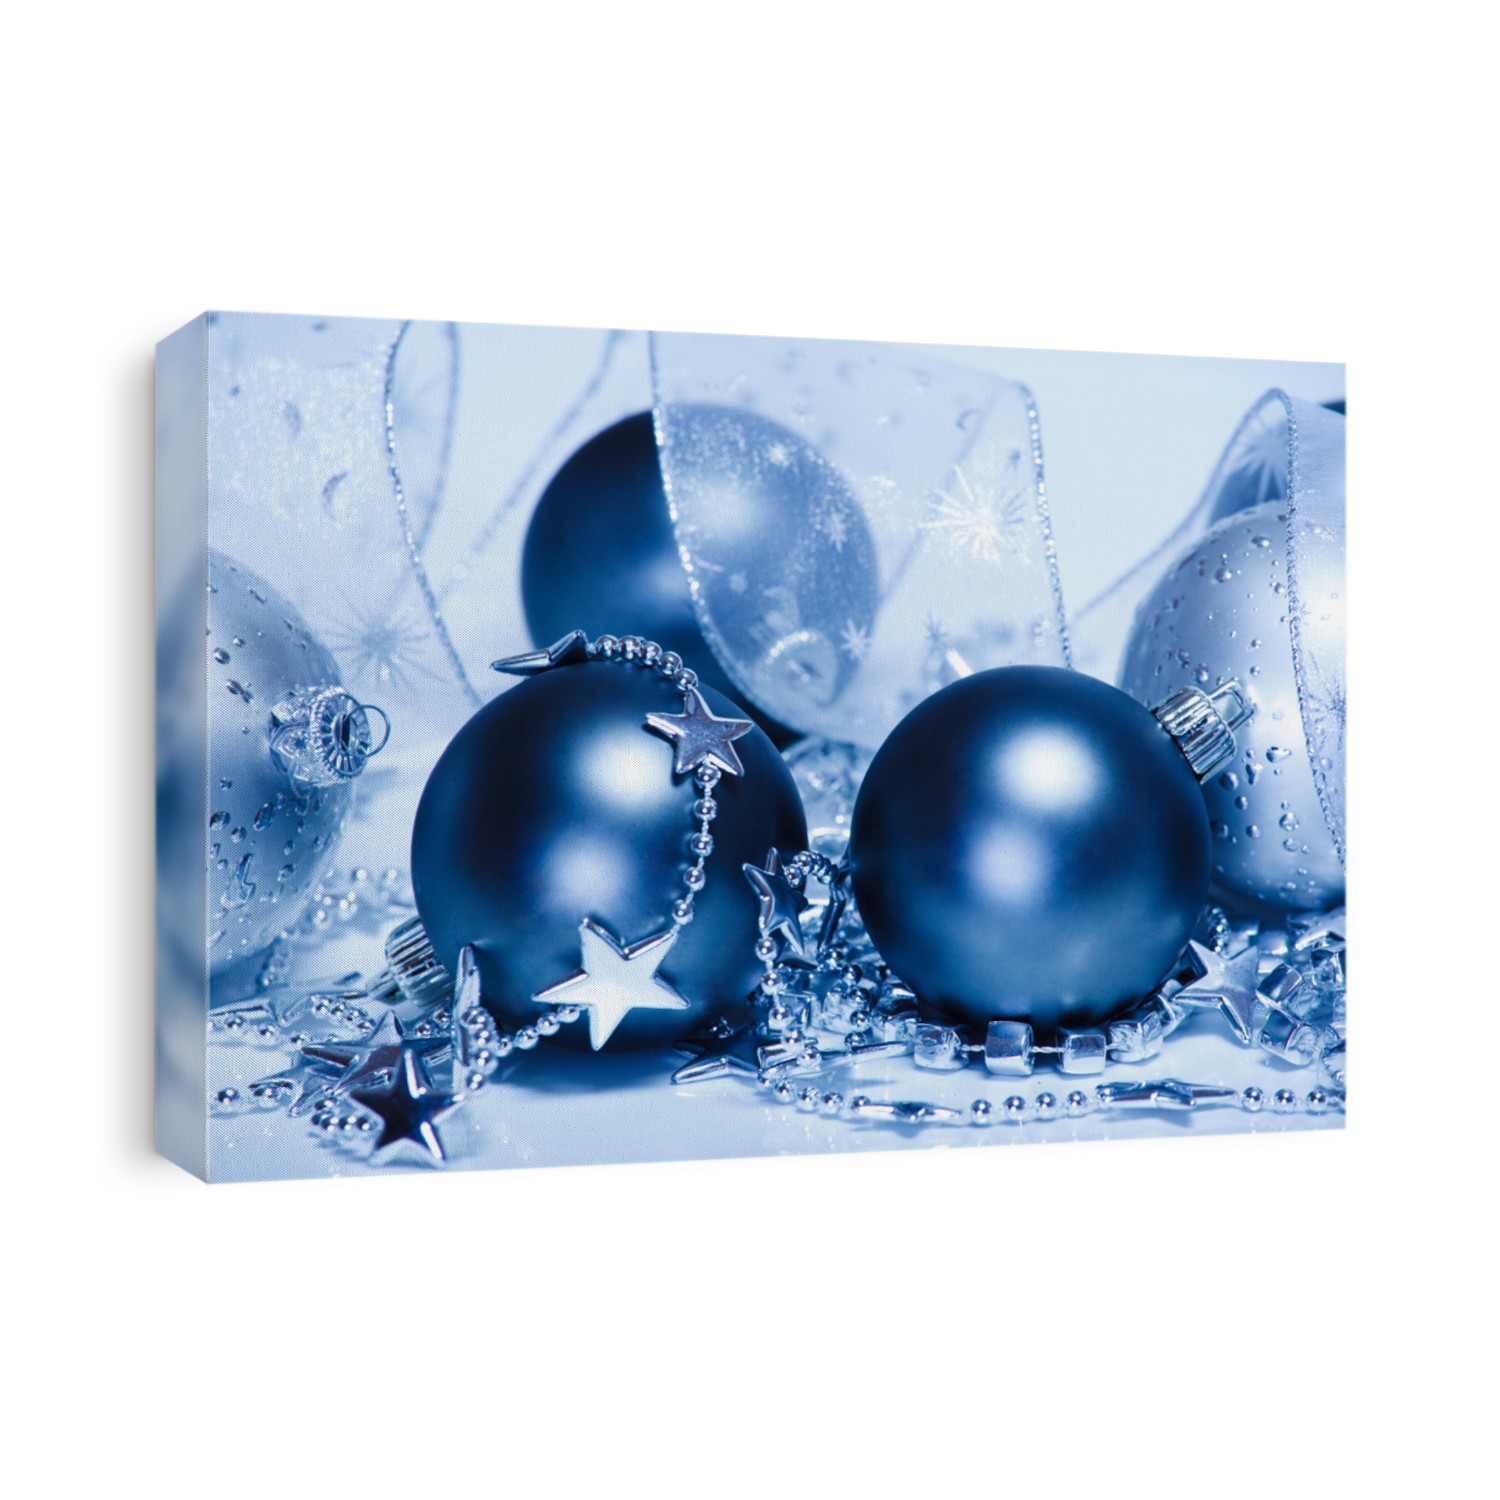 Silver and blue Christmas decoration